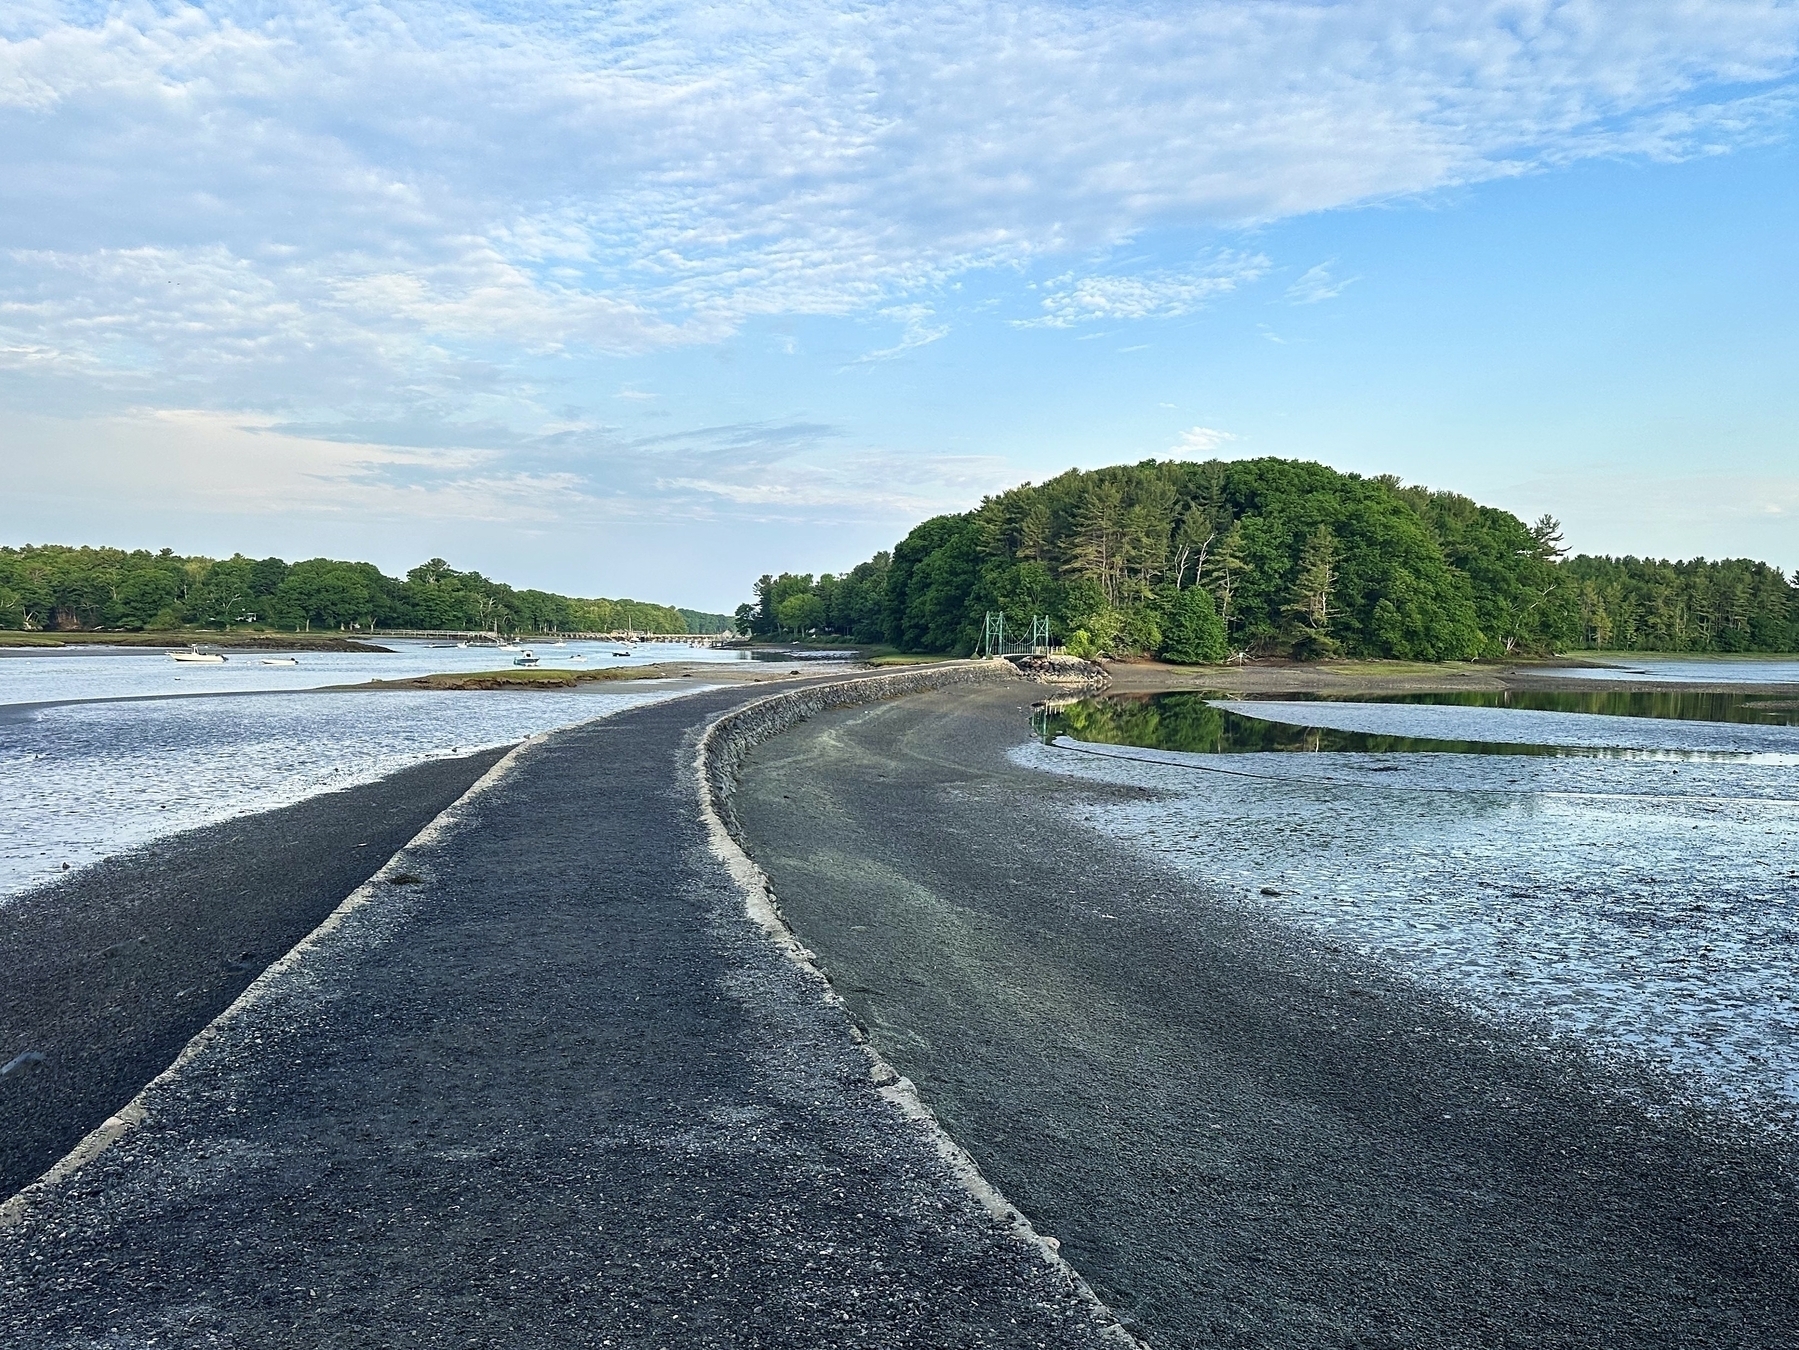 A narrow paved path stretches towards a tree-covered island surrounded by low tide waters under a partly cloudy sky